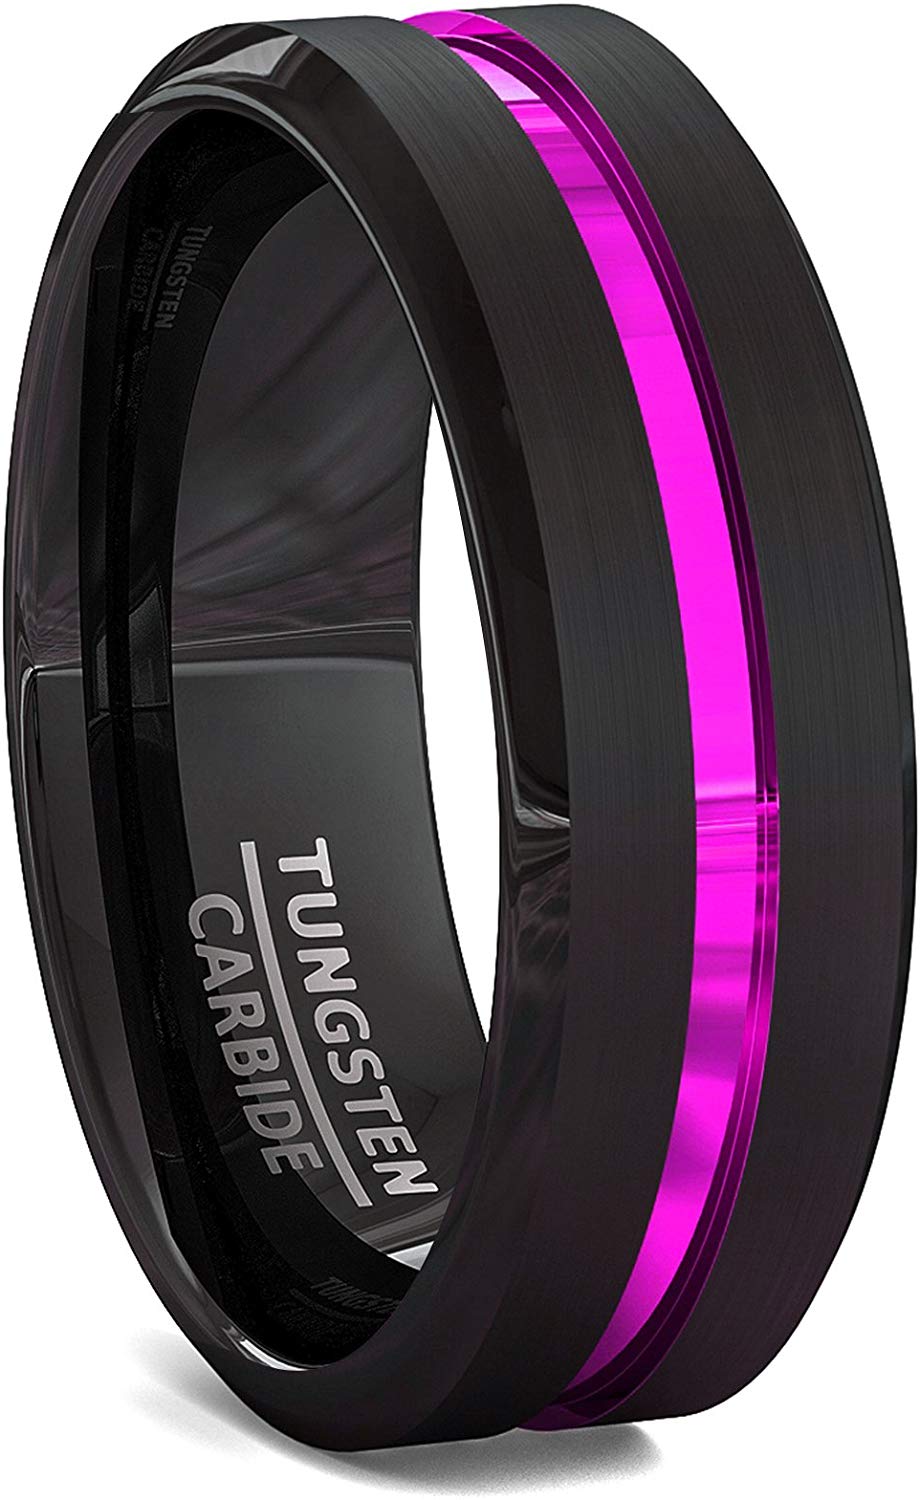 8mm Metal Purple Tungsten Ring Groove Beveled Edge with Black Comfort Fit